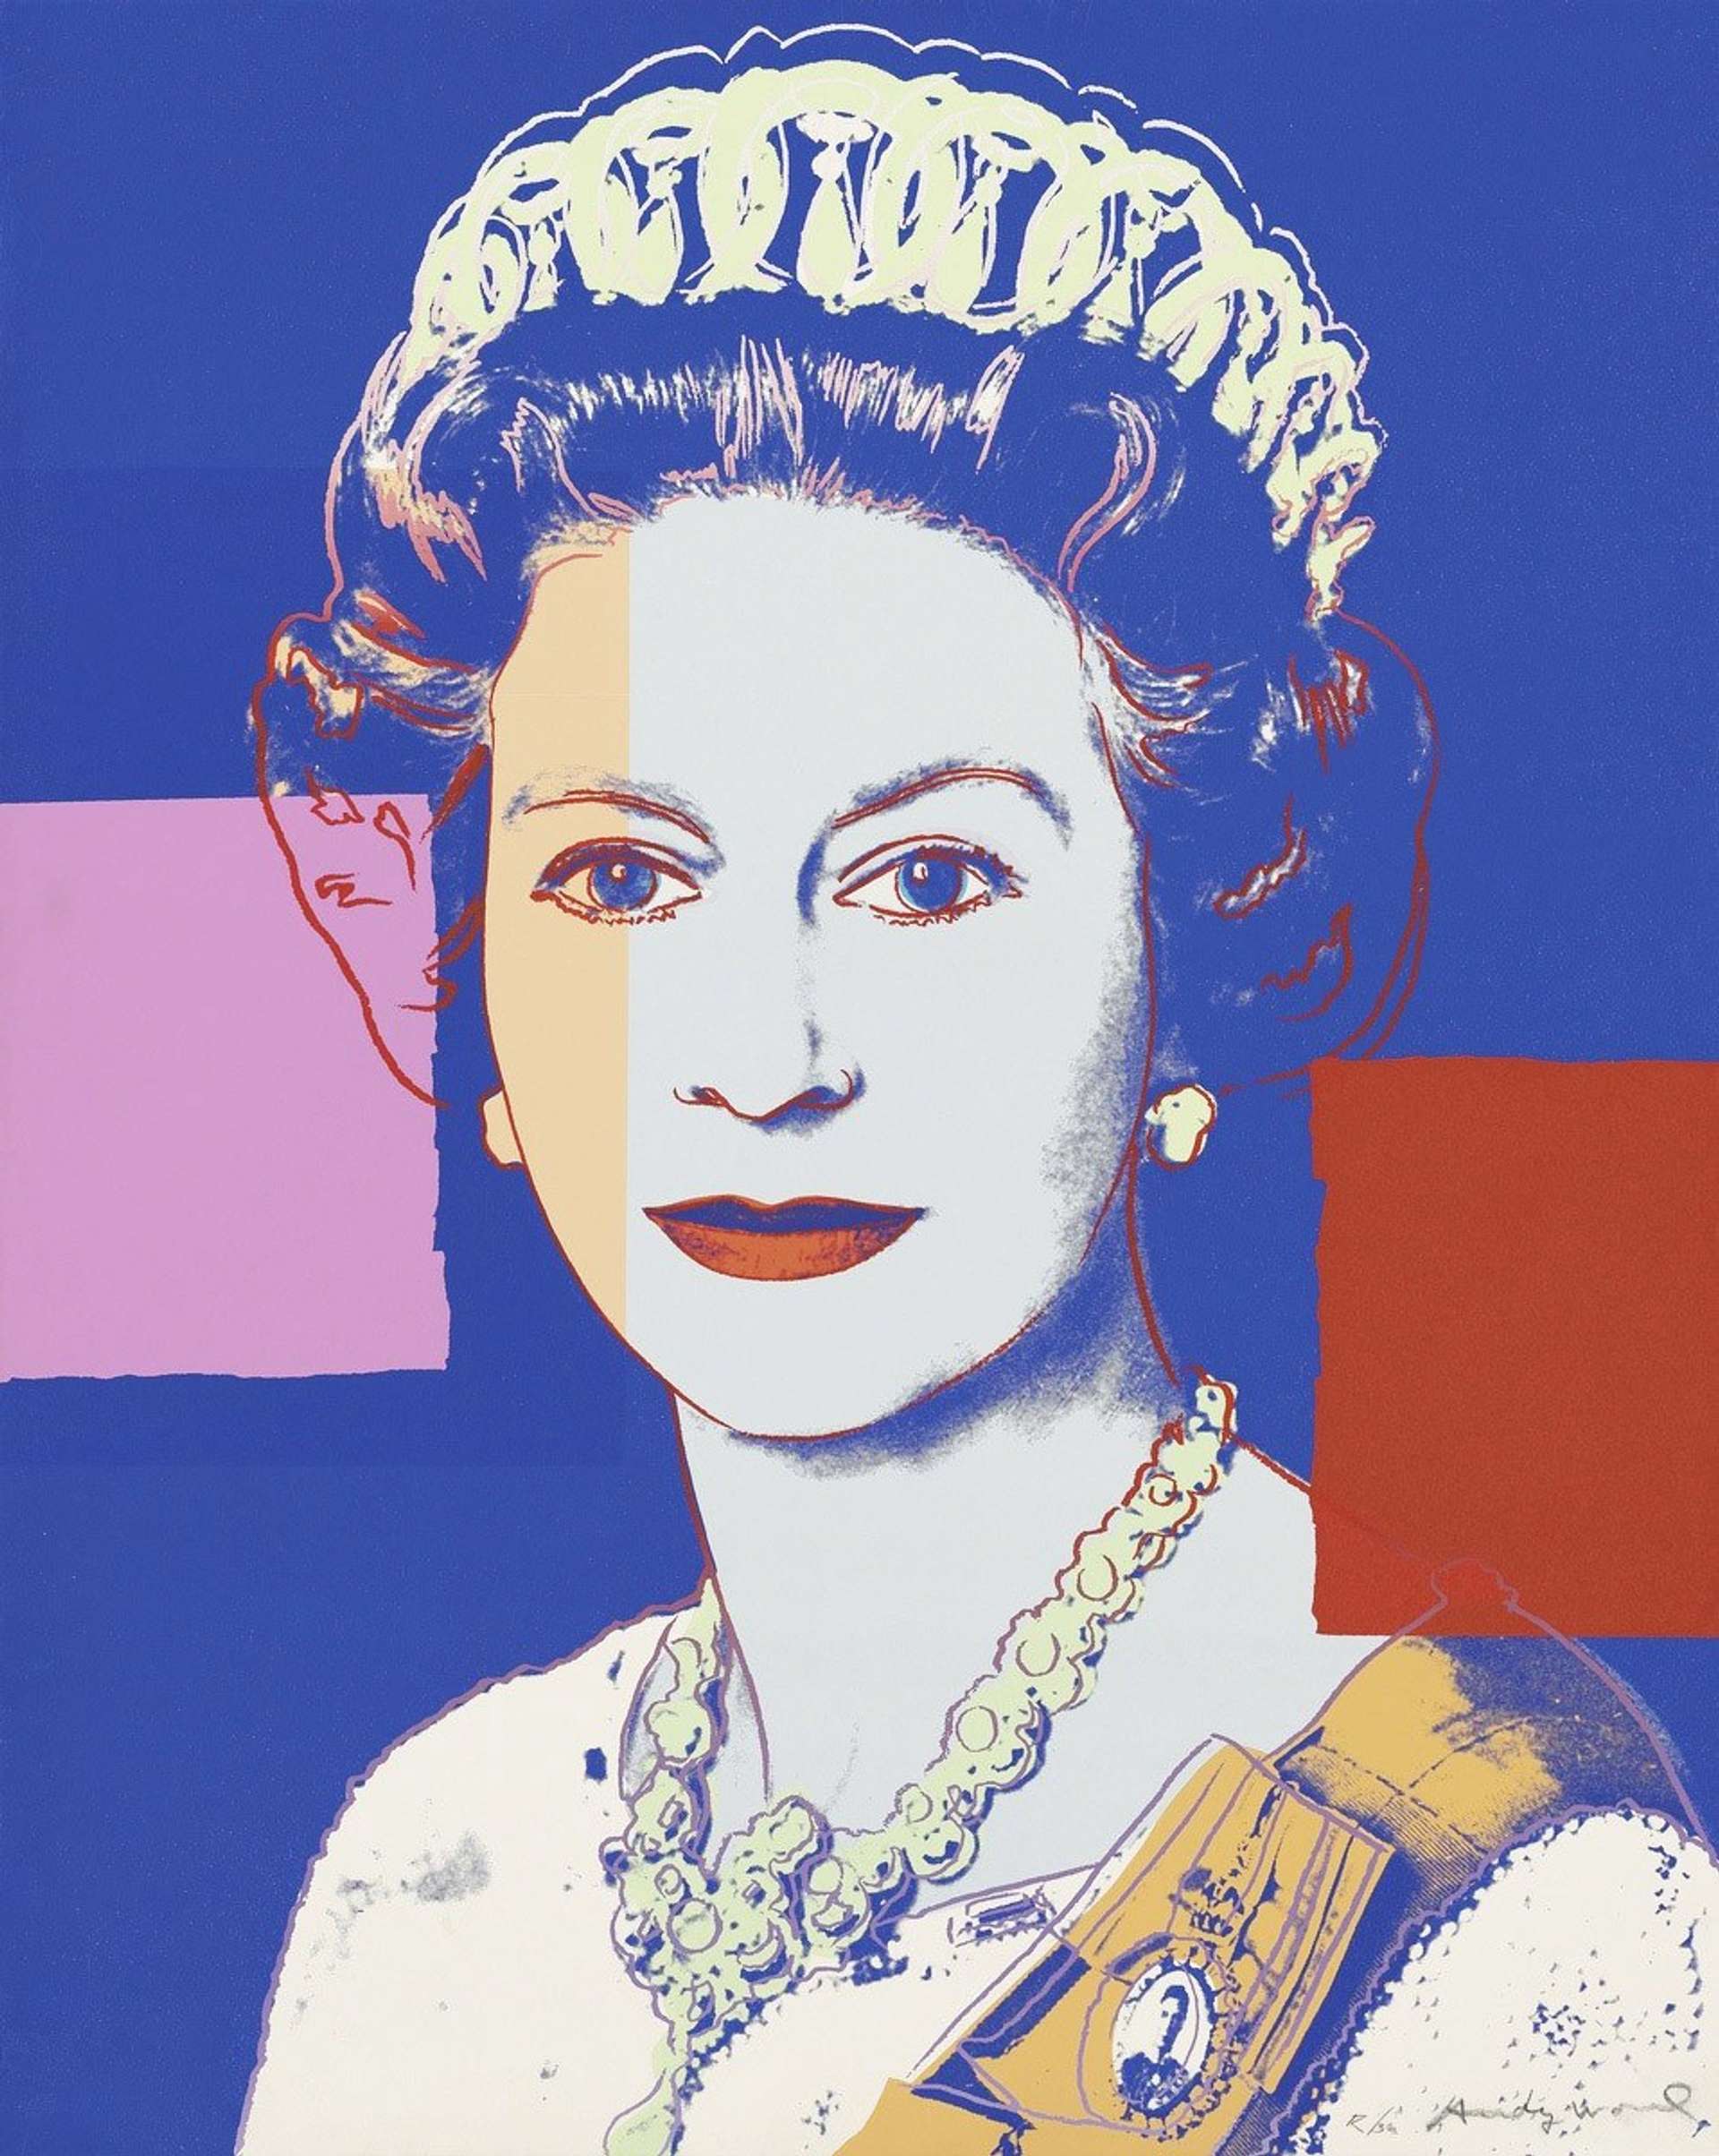 Series To Watch On the Andy Warhol Market: Reigning Queens Series